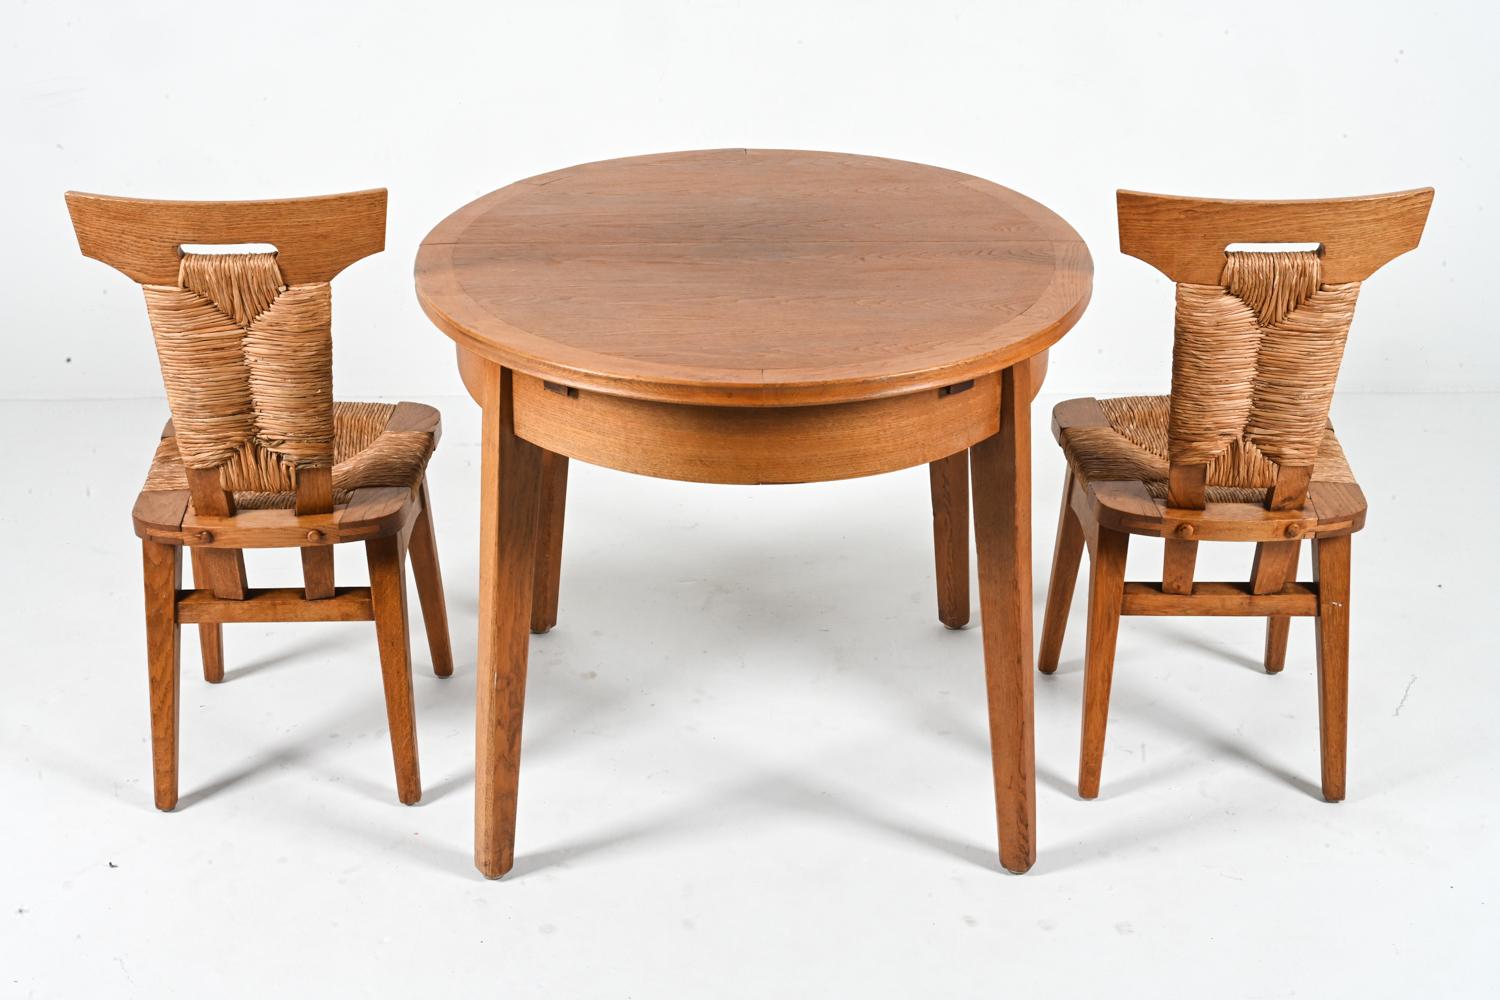 W. Kuyper Dutch Arts & Crafts Dining Suite in Oak & Rush, c. 1920s For Sale 9